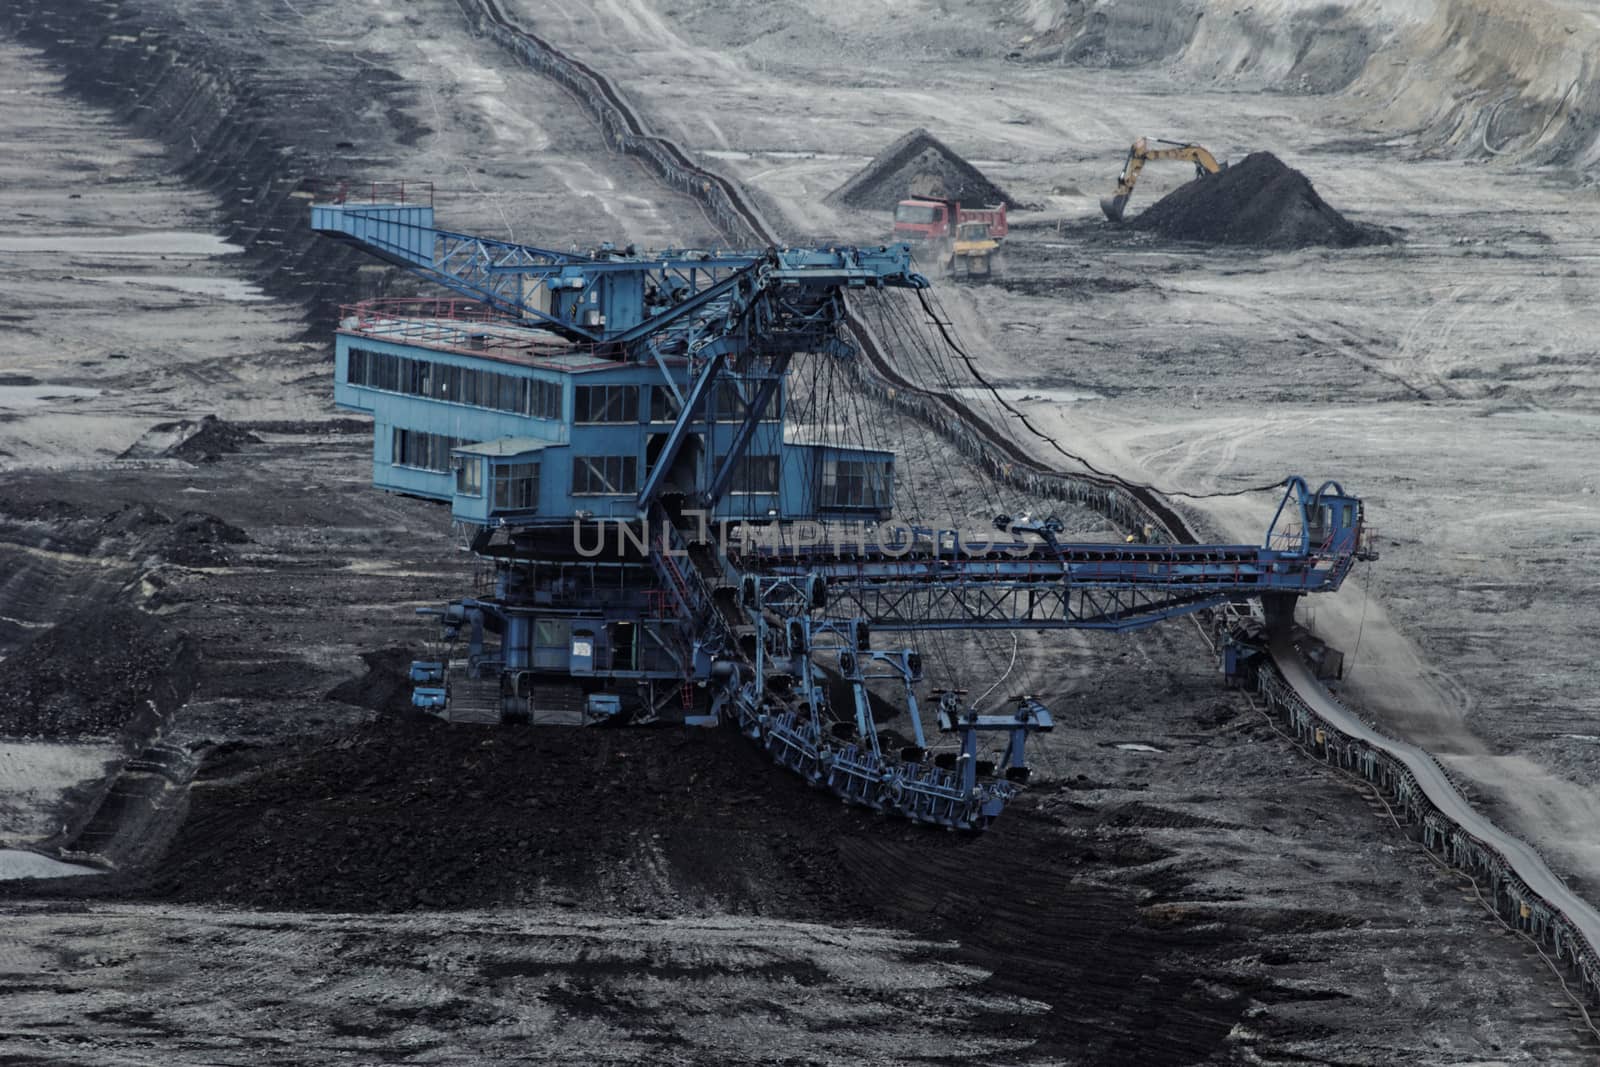 Coal mining in an open pit with huge industrial machine